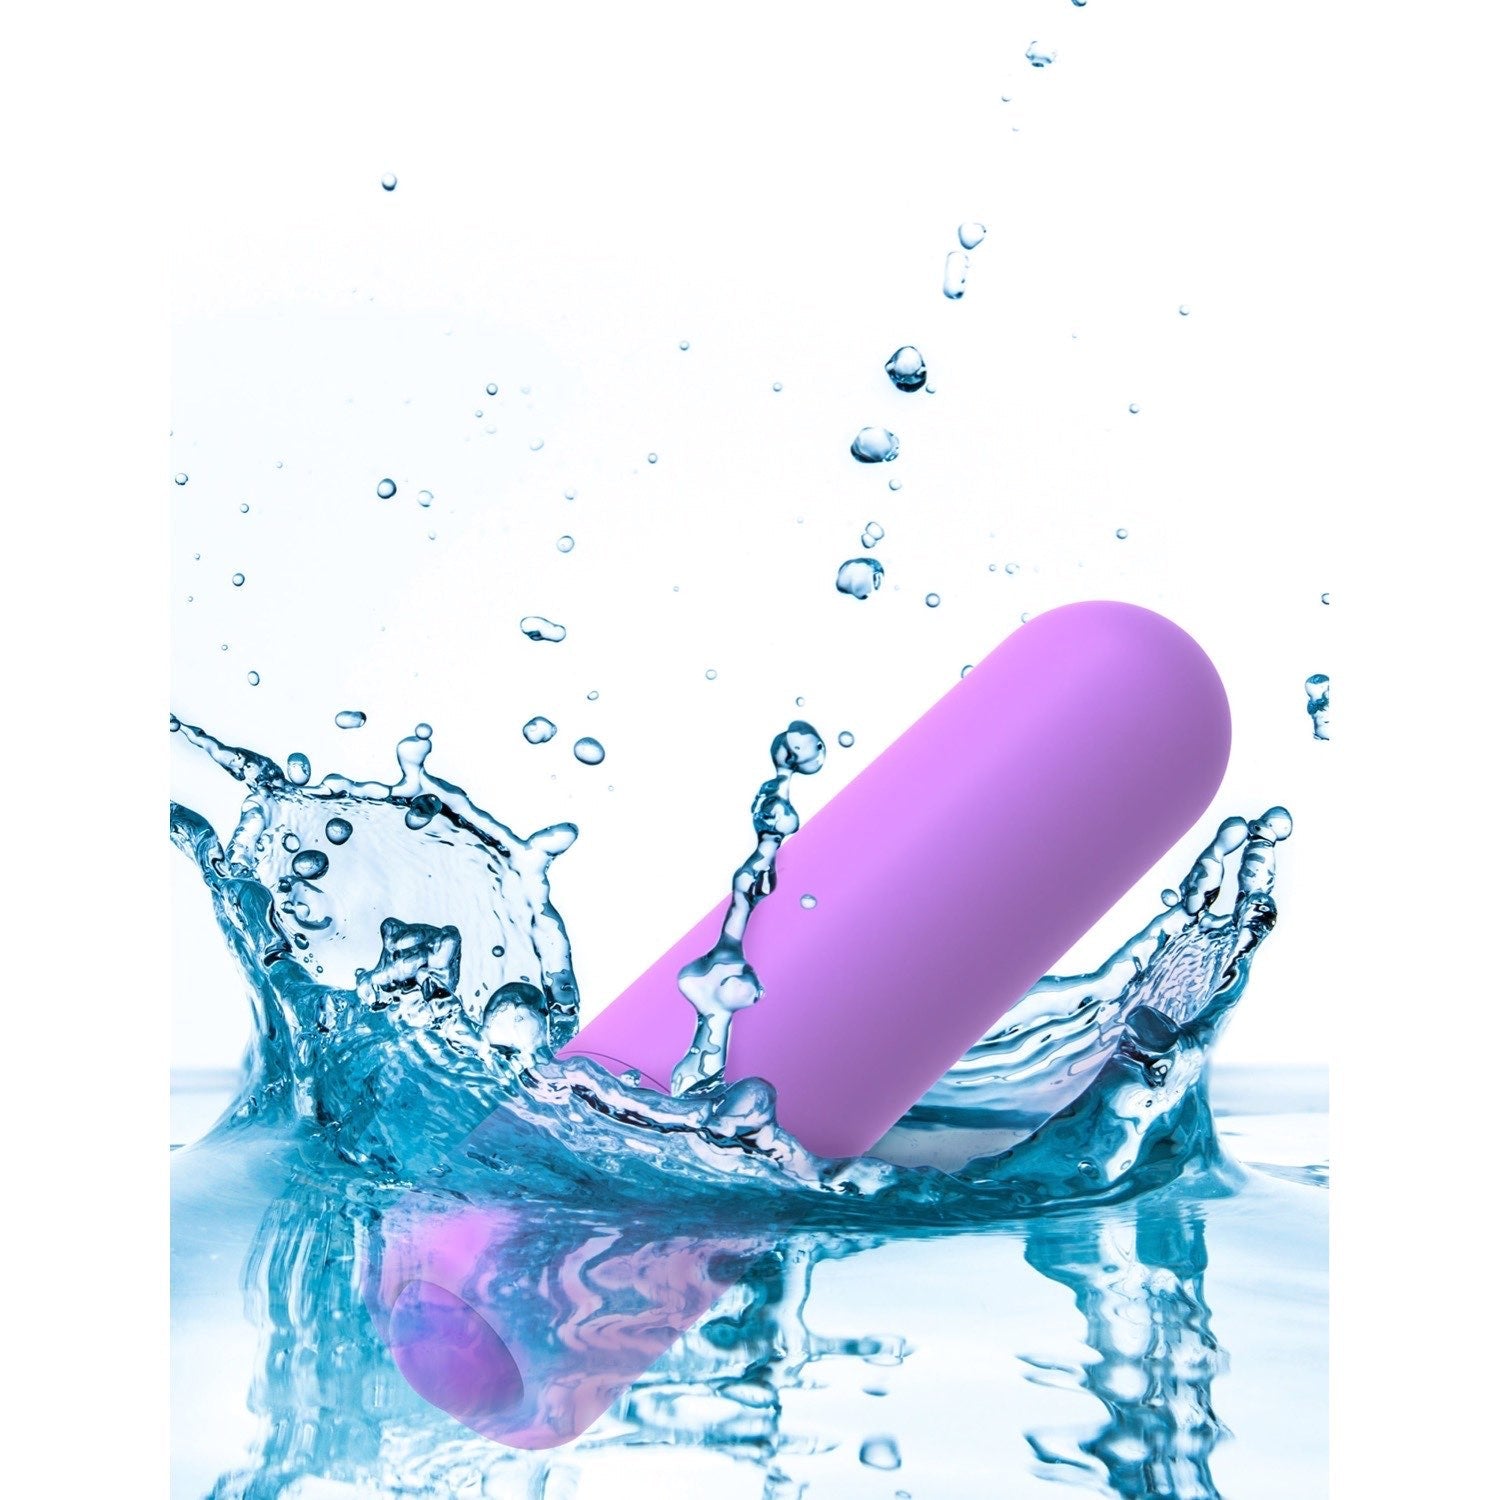 Fantasy For Her Pocket Bullet - Purple 9.4 cm (3.75&quot;) Bullet by Pipedream